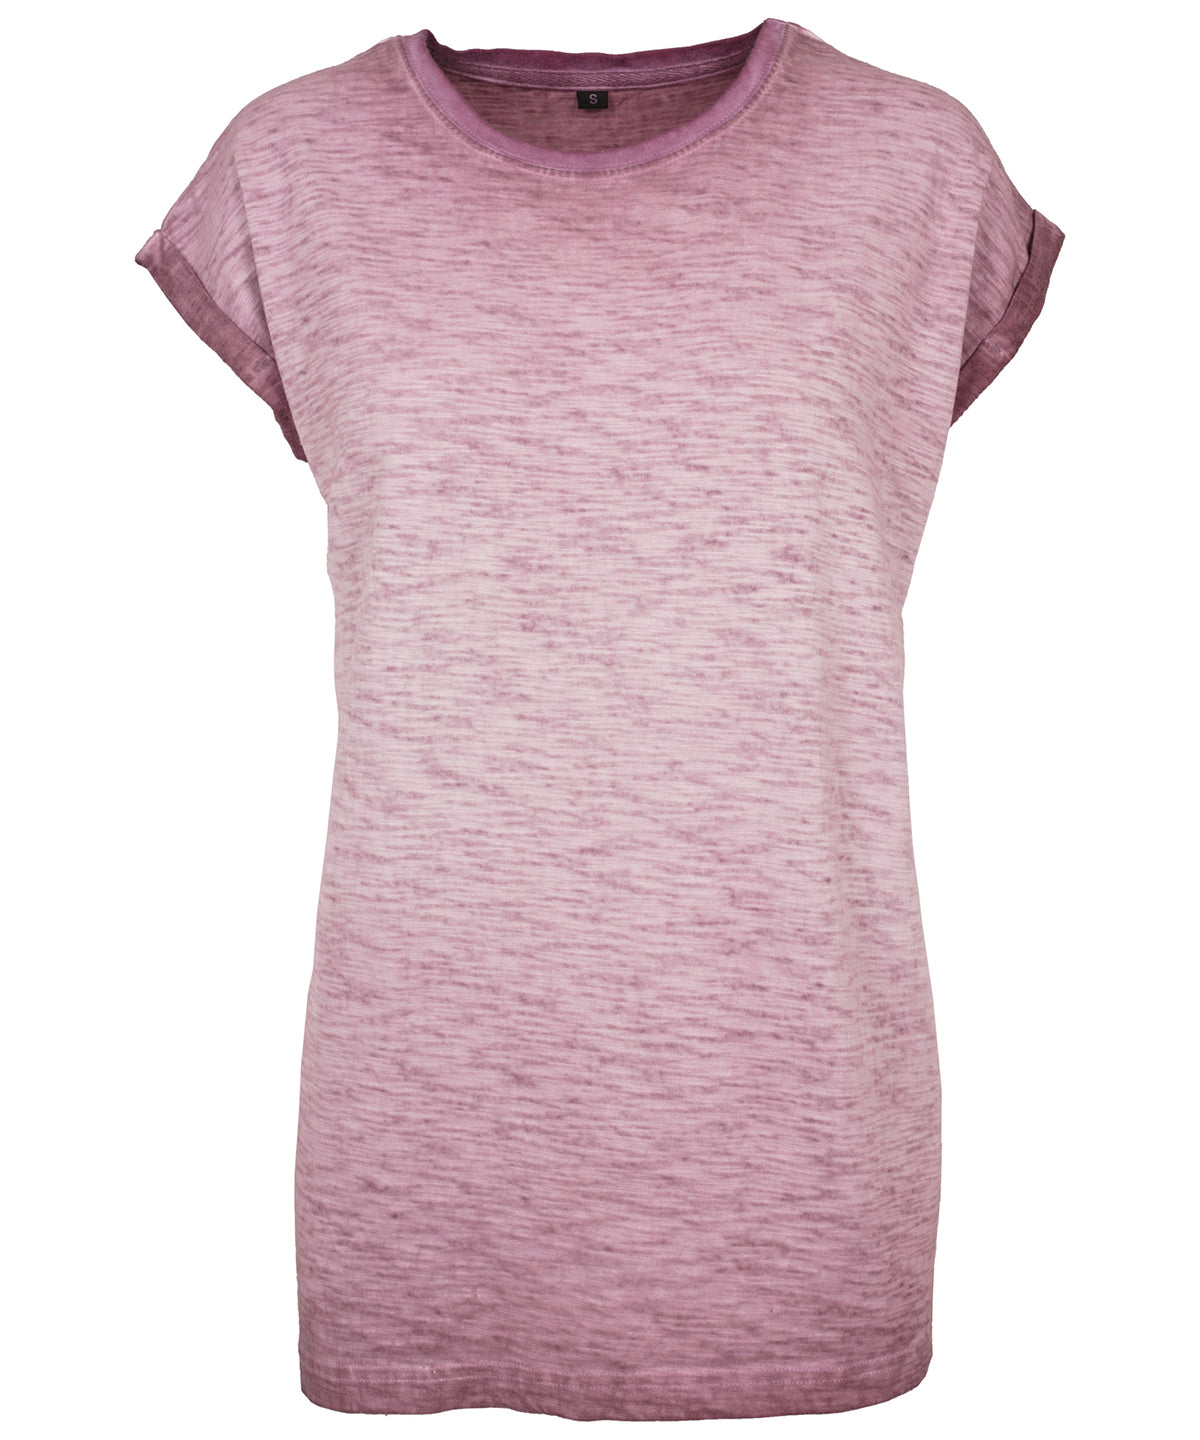 Build Your Brand Womens Spray Dye Extended Shoulder Tee